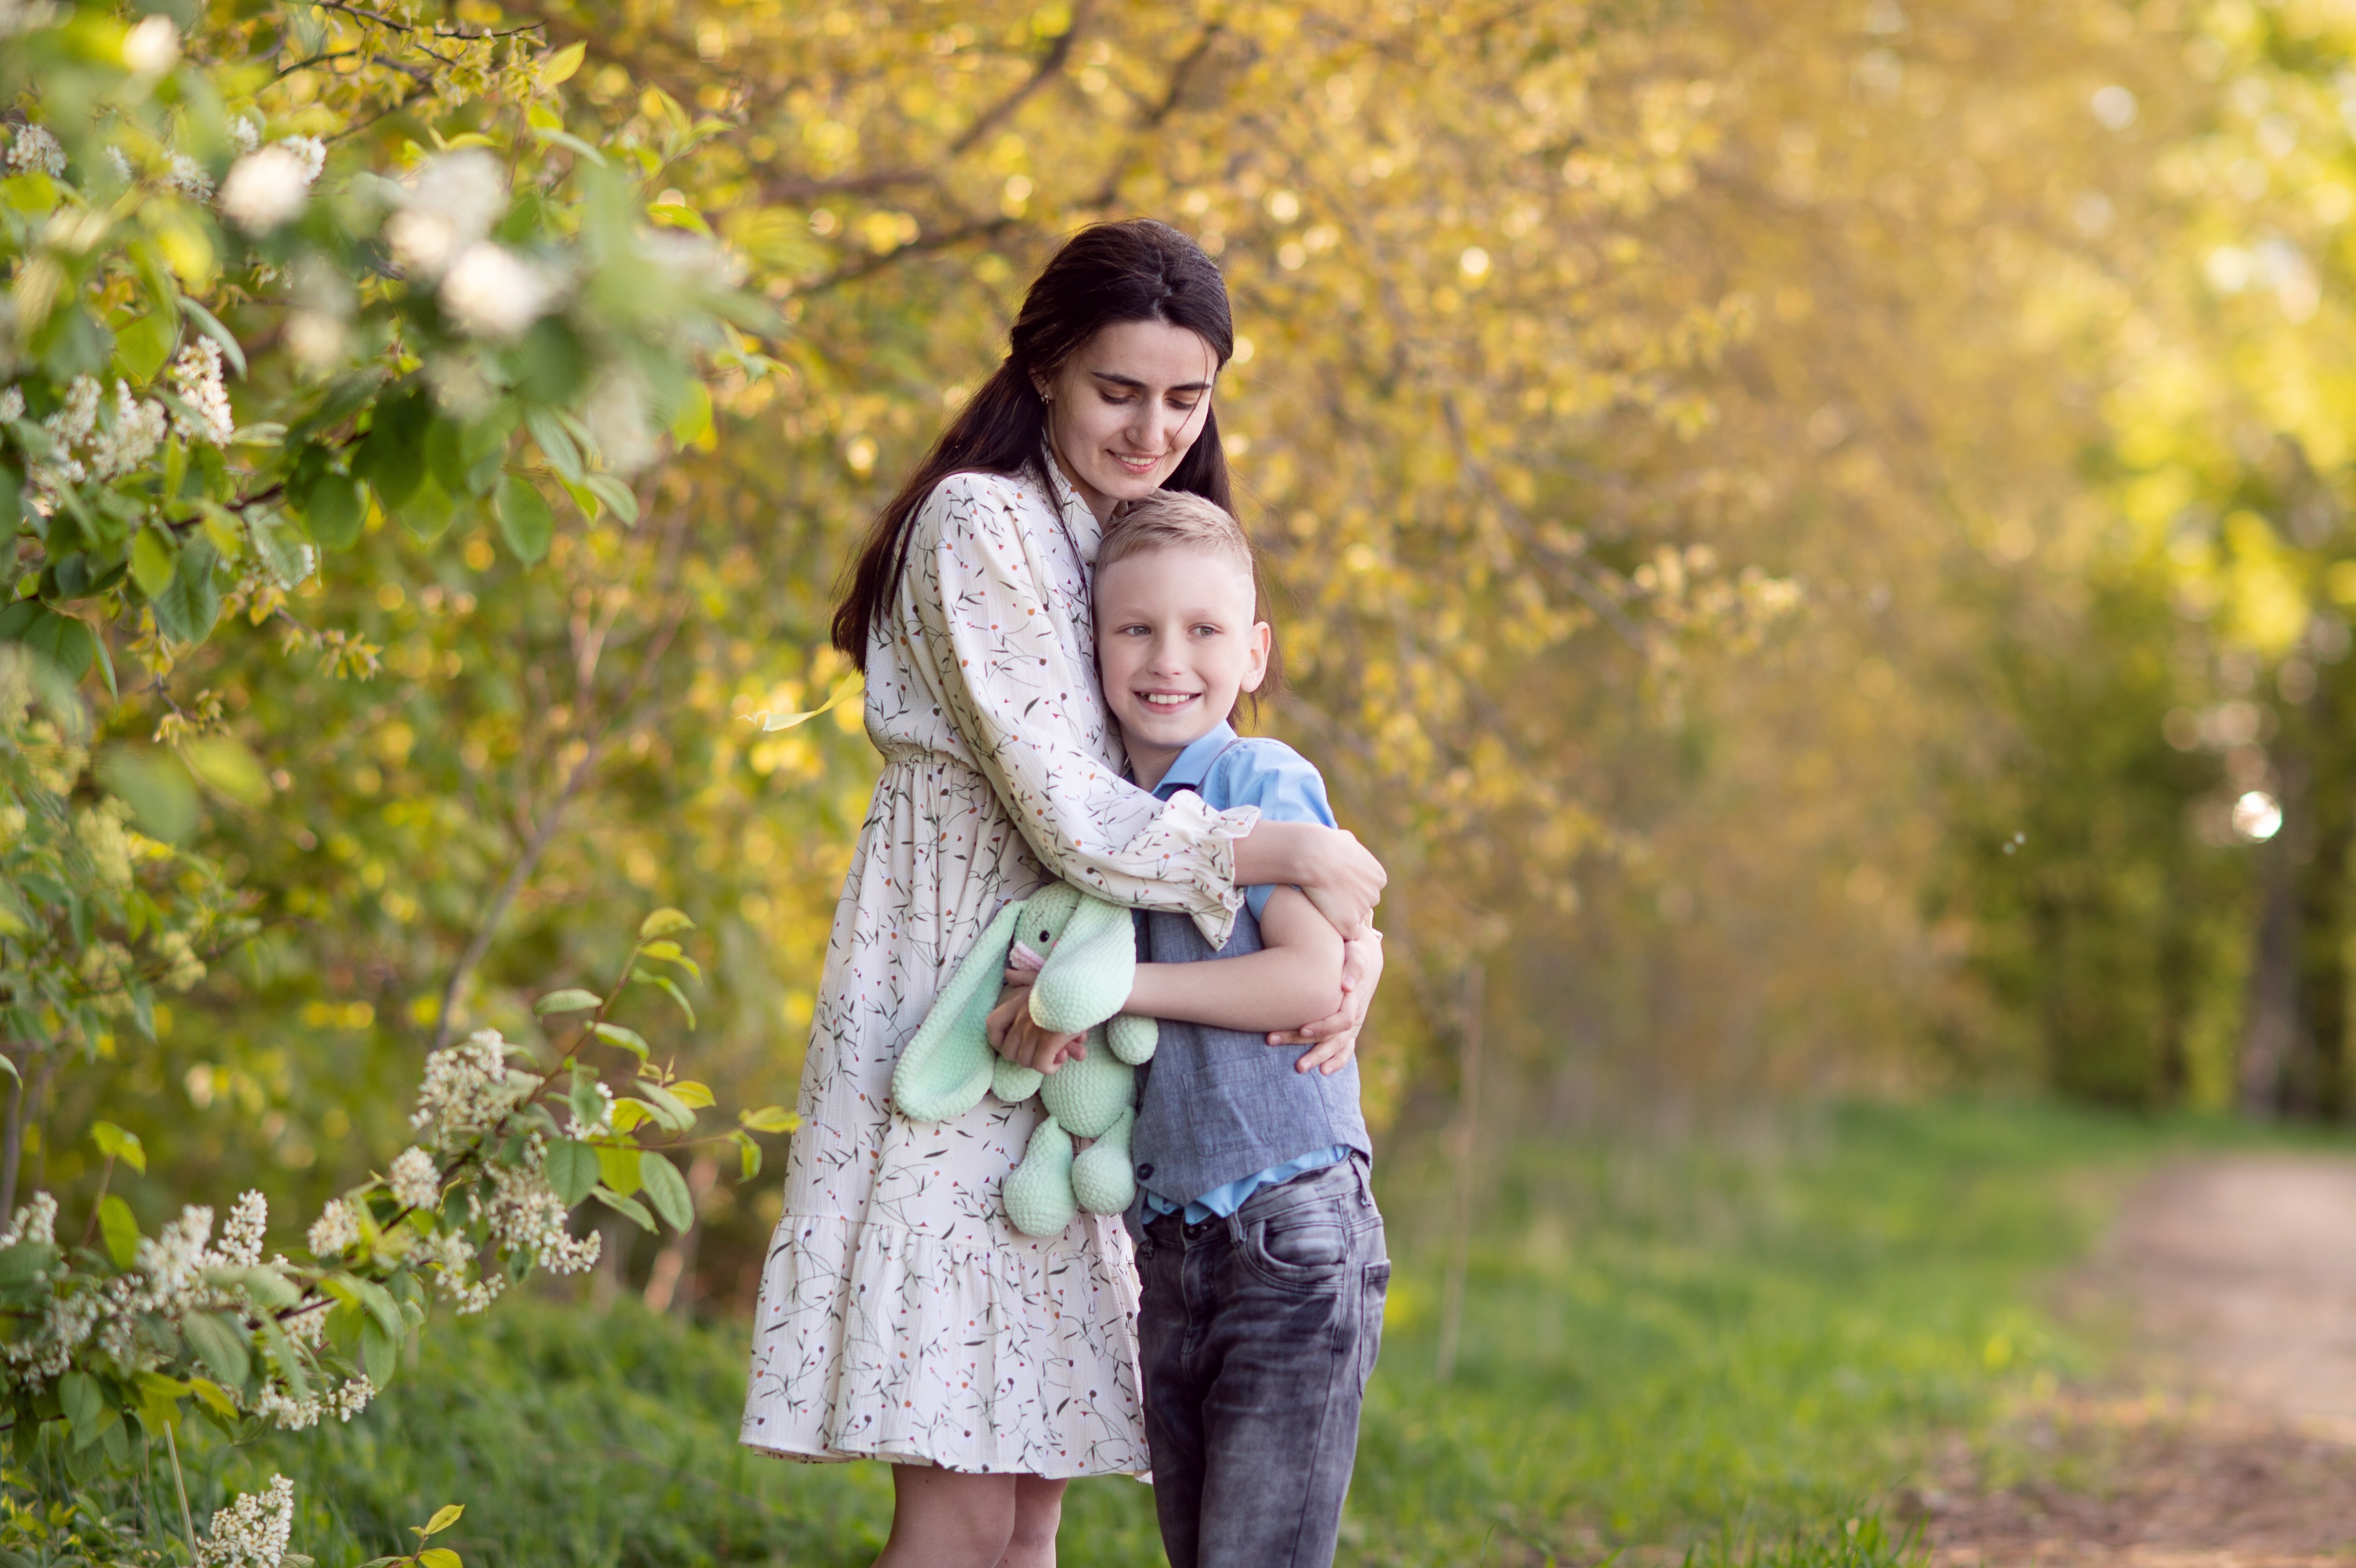 A mother and son hugging in a park | Source: Shutterstock